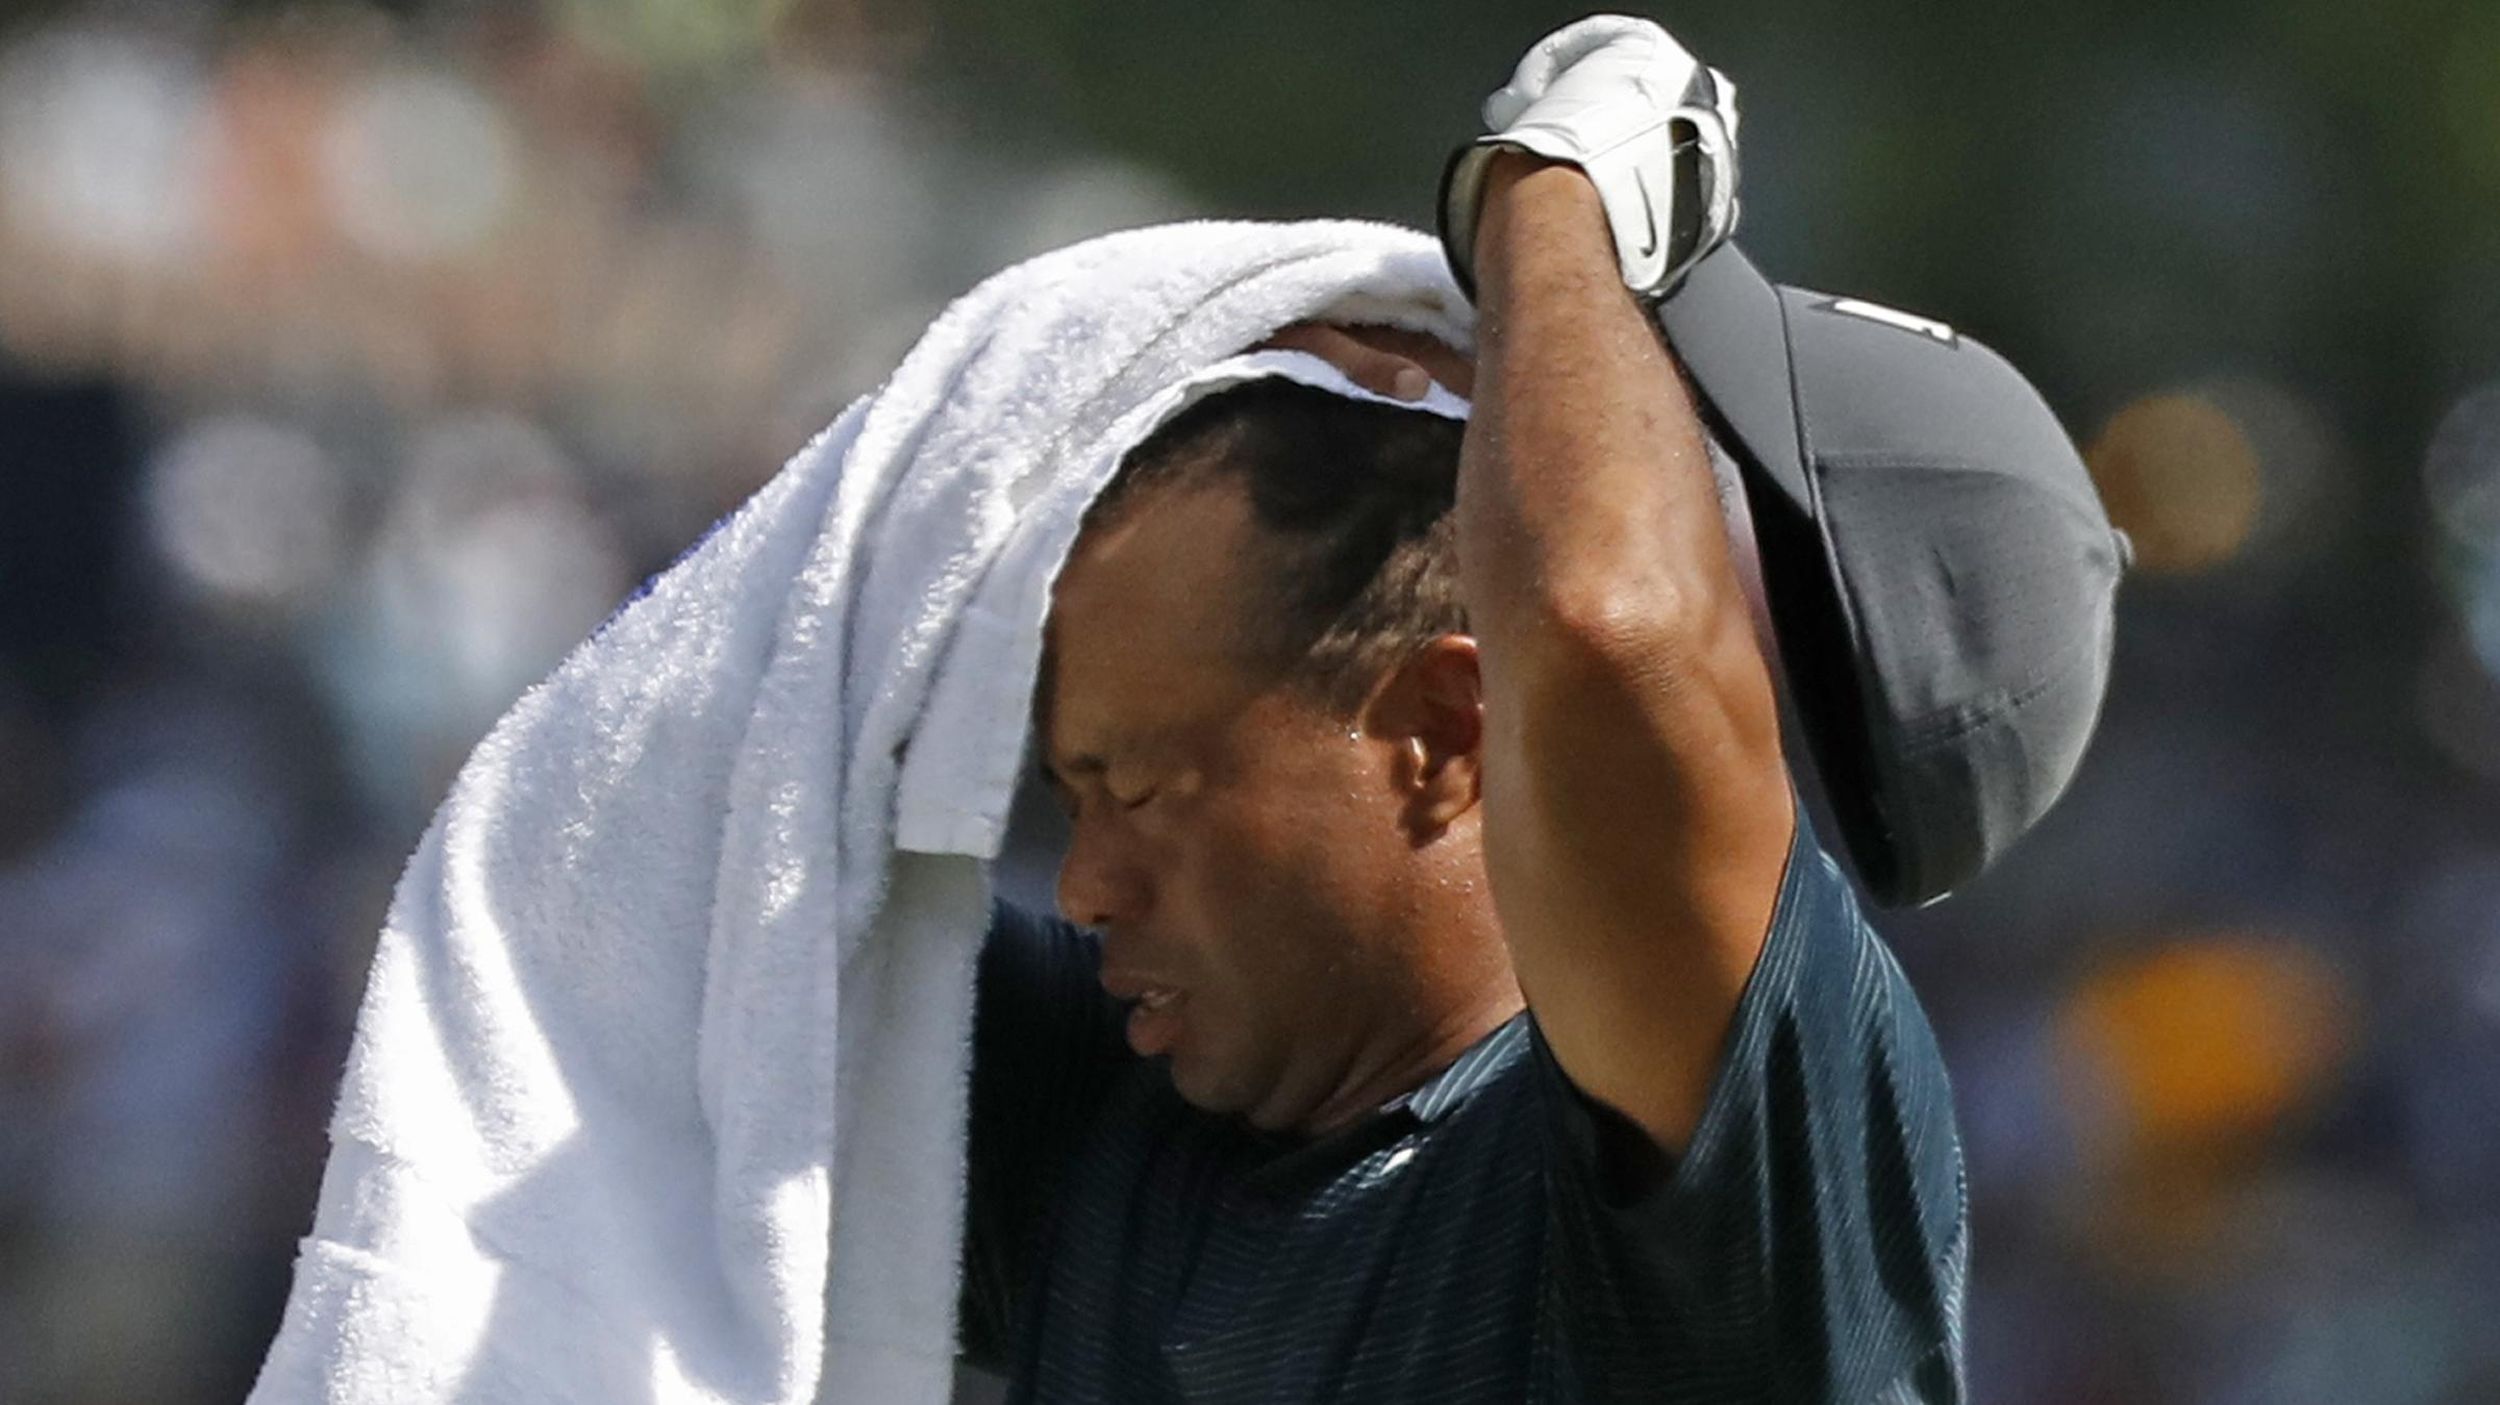 No sweat: Tiger Woods changes shirt and game to stay in mix at PGA  Championship | The Spokesman-Review